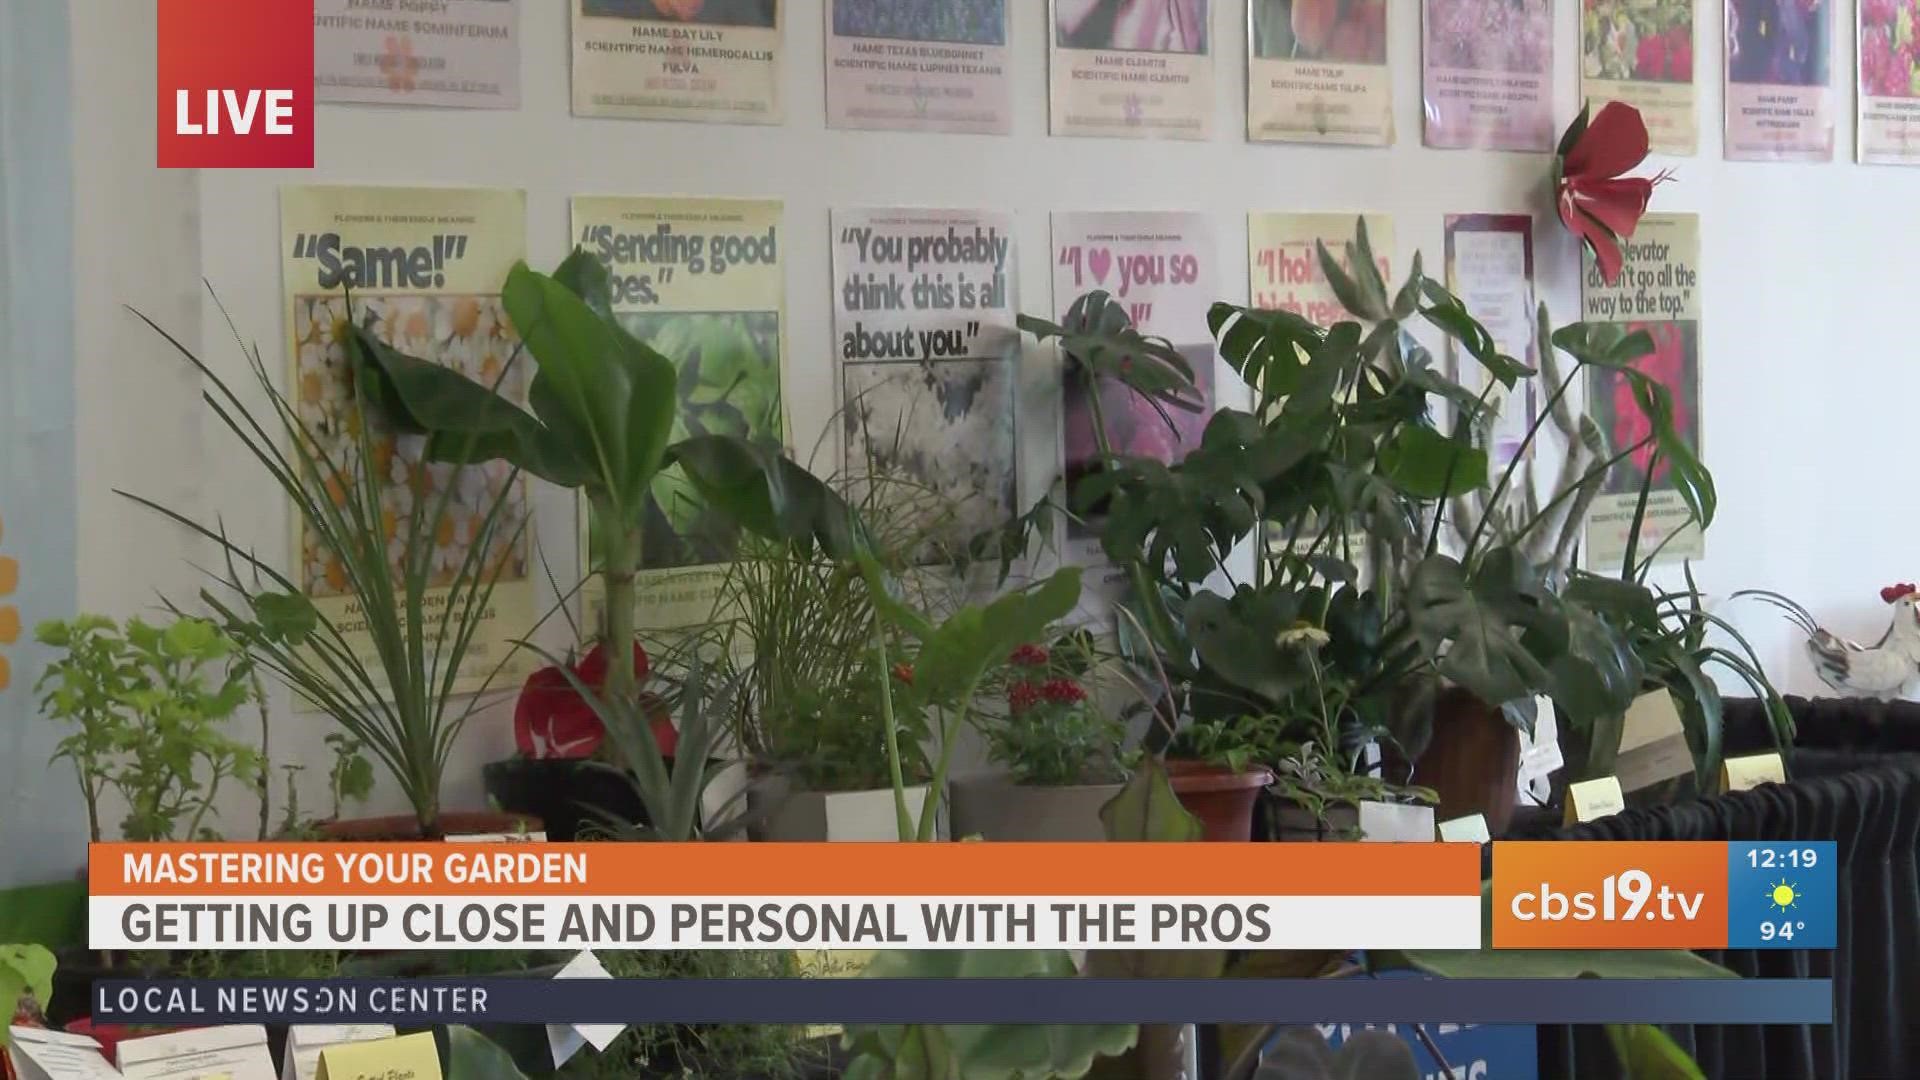 If you have had a question about maintaining your garden or you're interested in joining the Master Gardeners, check out their exhibit at the East Texas State fair